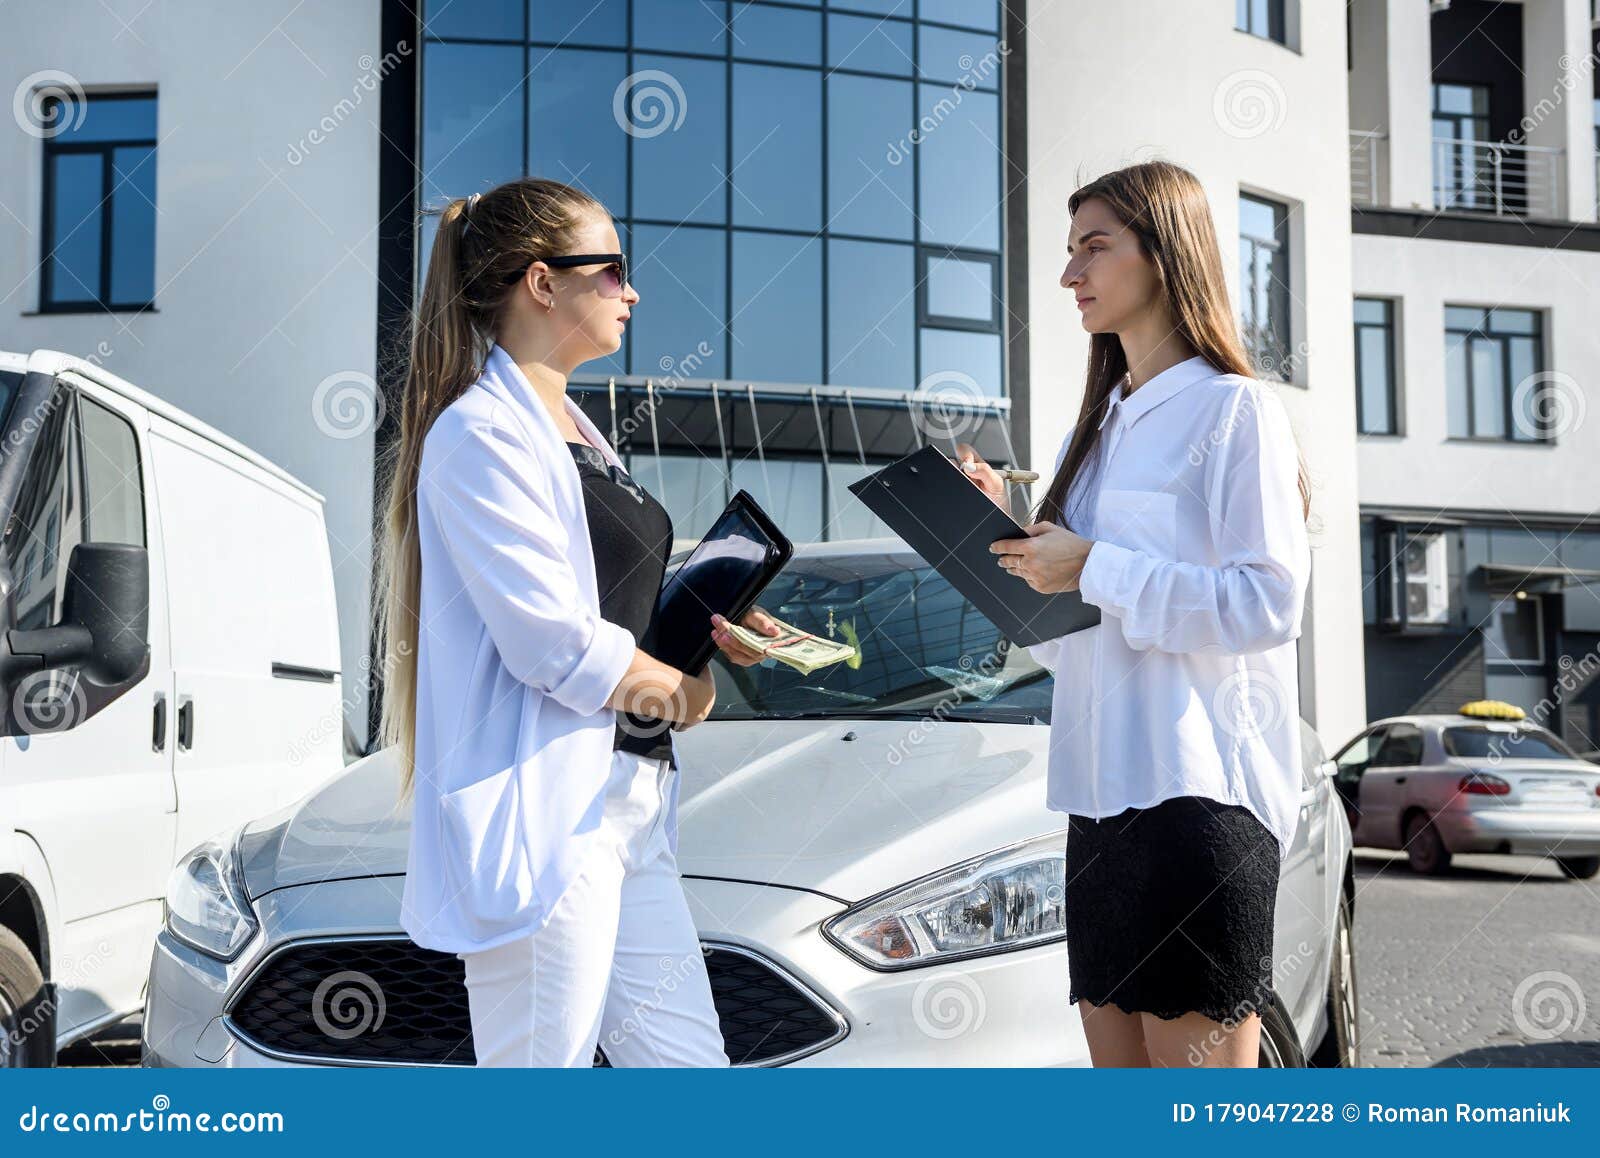 Rent Or Car Buy Concept. Two Women With Dollar Bundle Posing Near Car Stock Photo - Image of ...